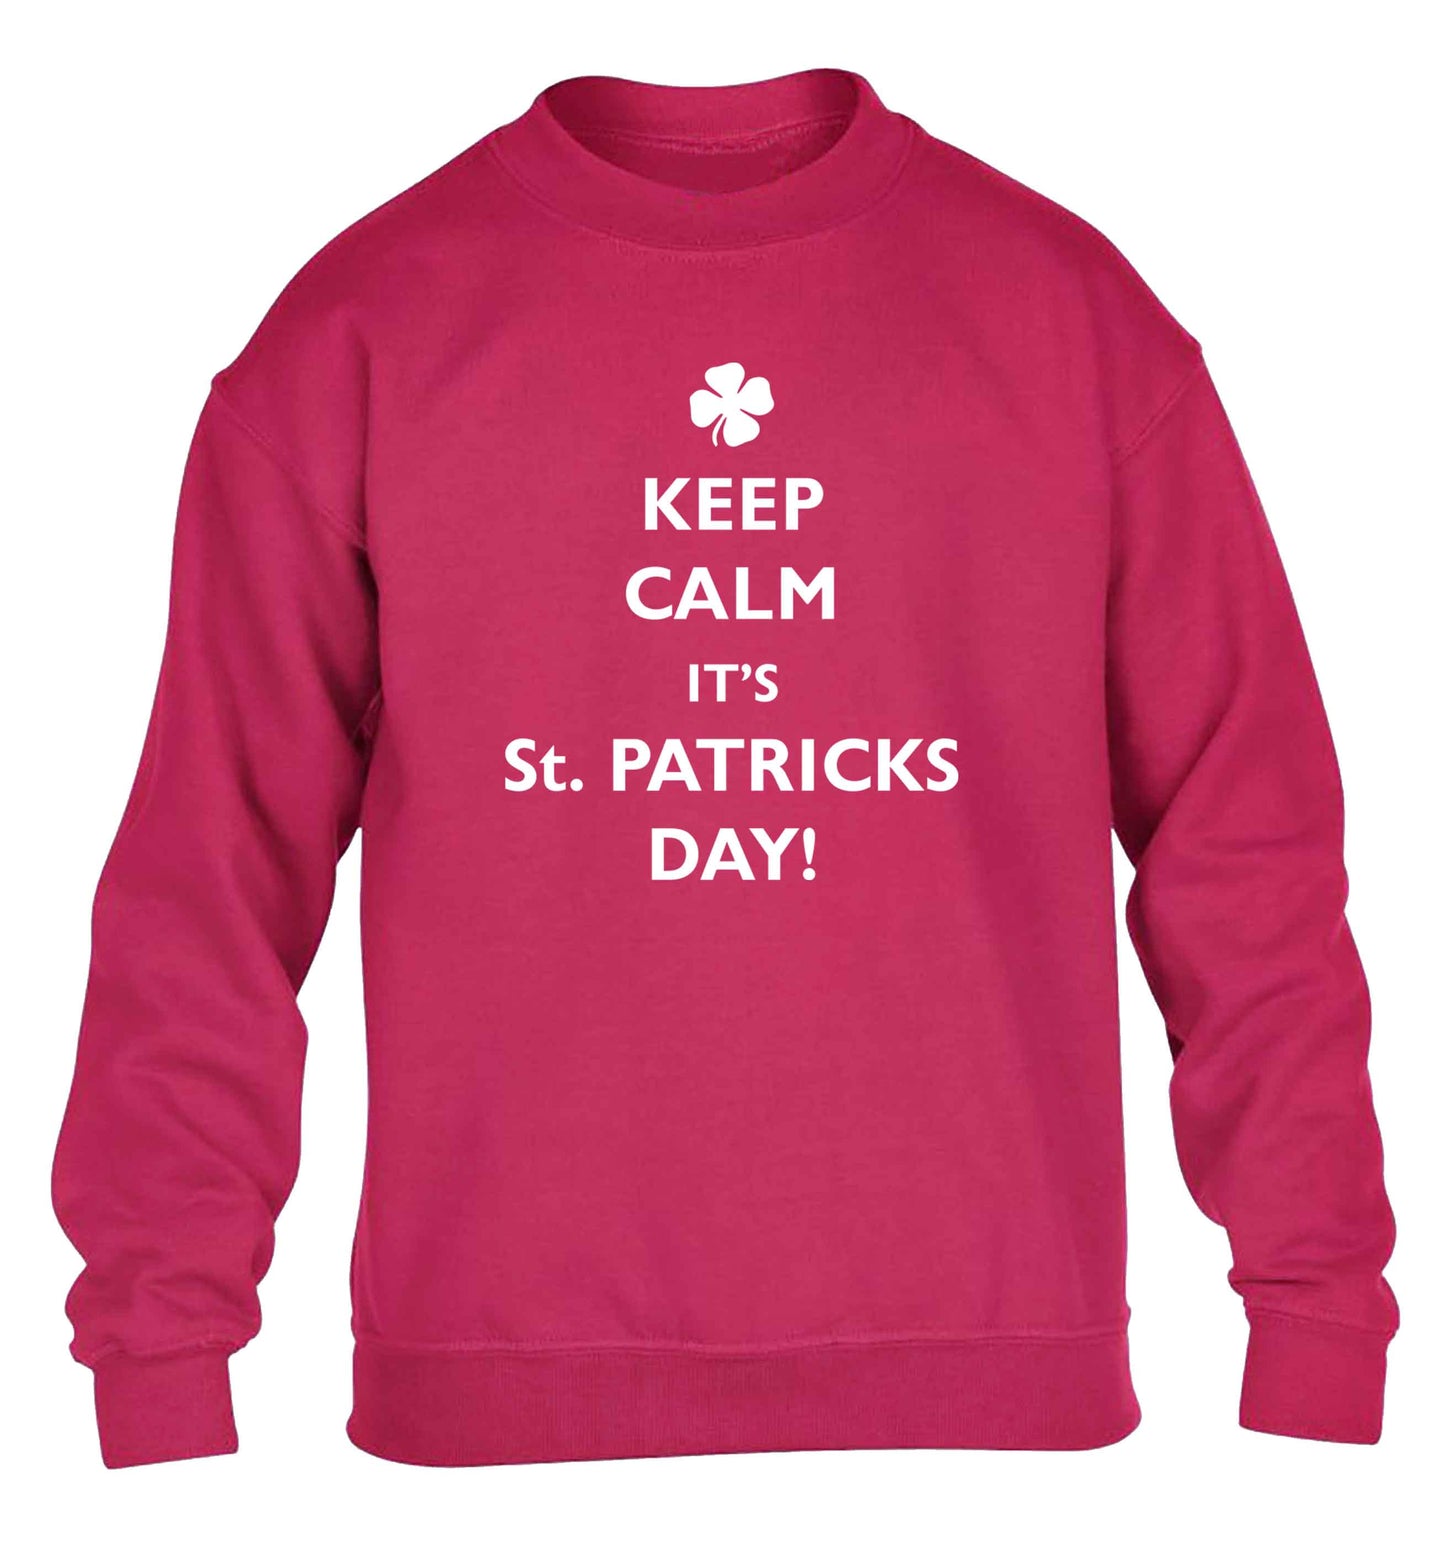 Keep calm it's St.Patricks day children's pink sweater 12-13 Years